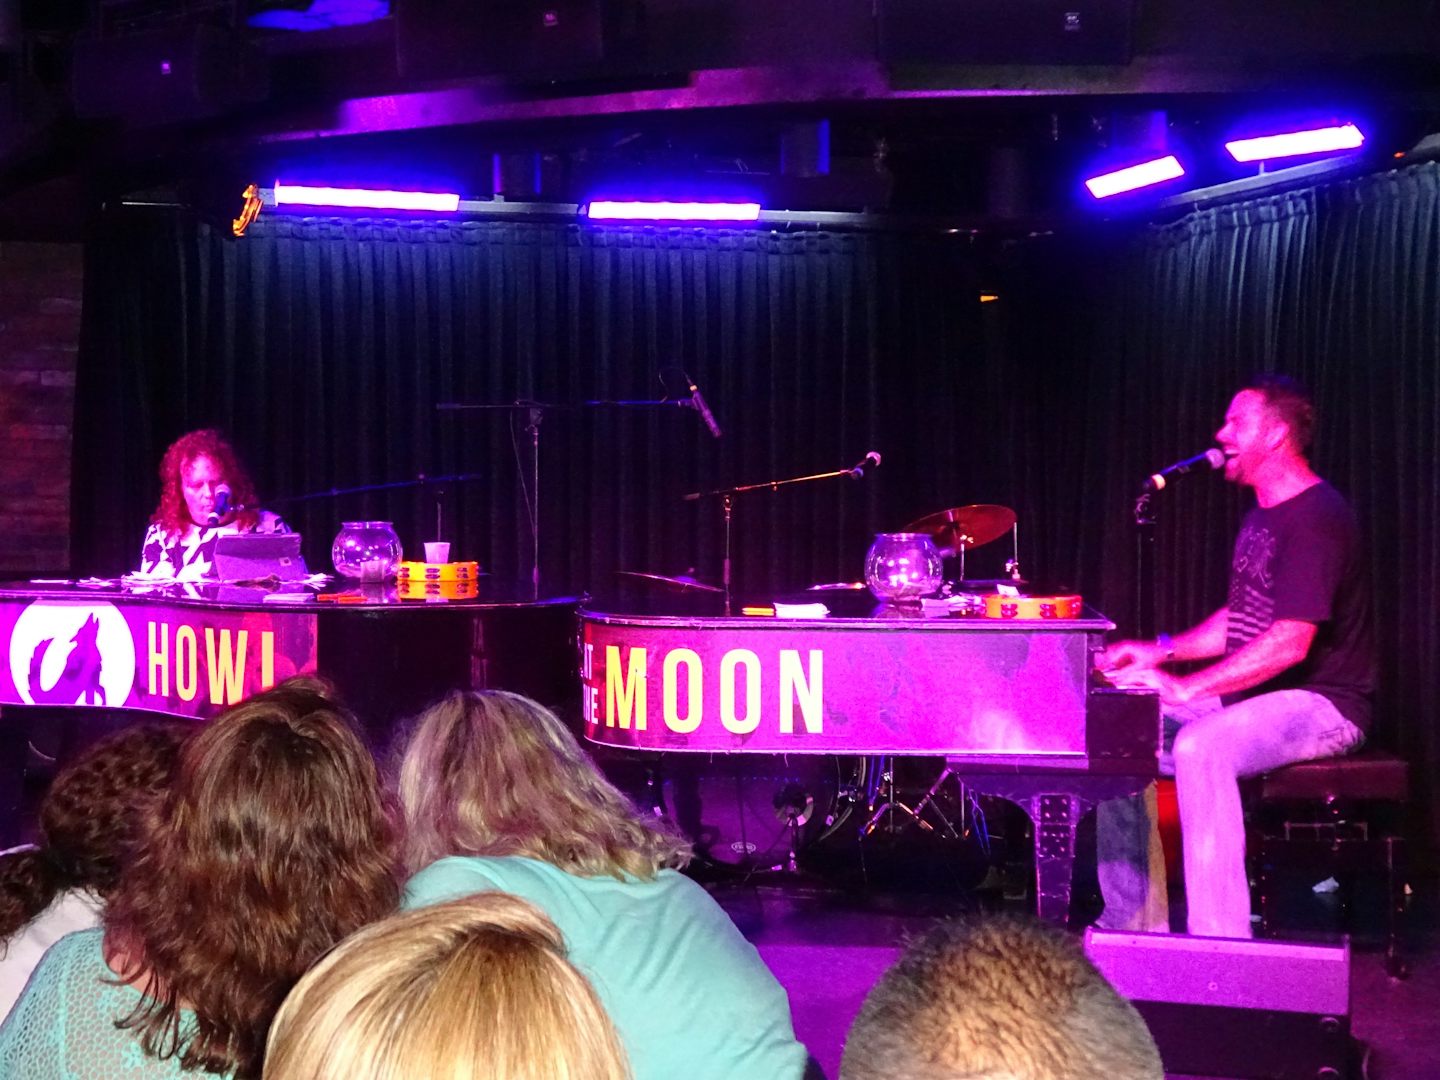 The entertainment onboard was top notch.  This is Howl at the Moon and was